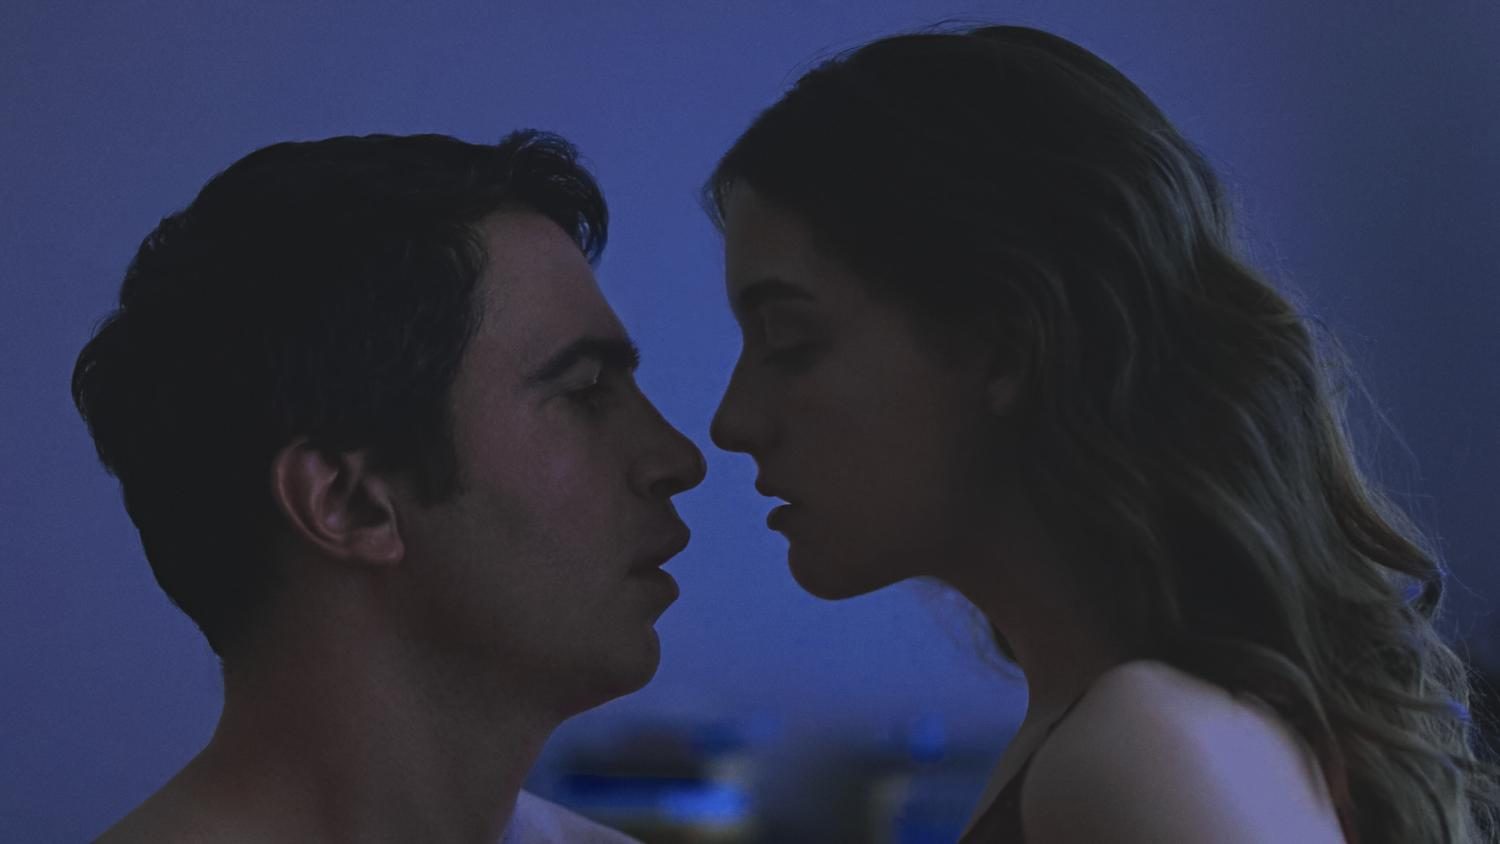 Blame, the self-written, self-directed, self-produced, self edited and self-starred film by Quinn Shephard debuted at the Tribeca Film Festival April 22. 